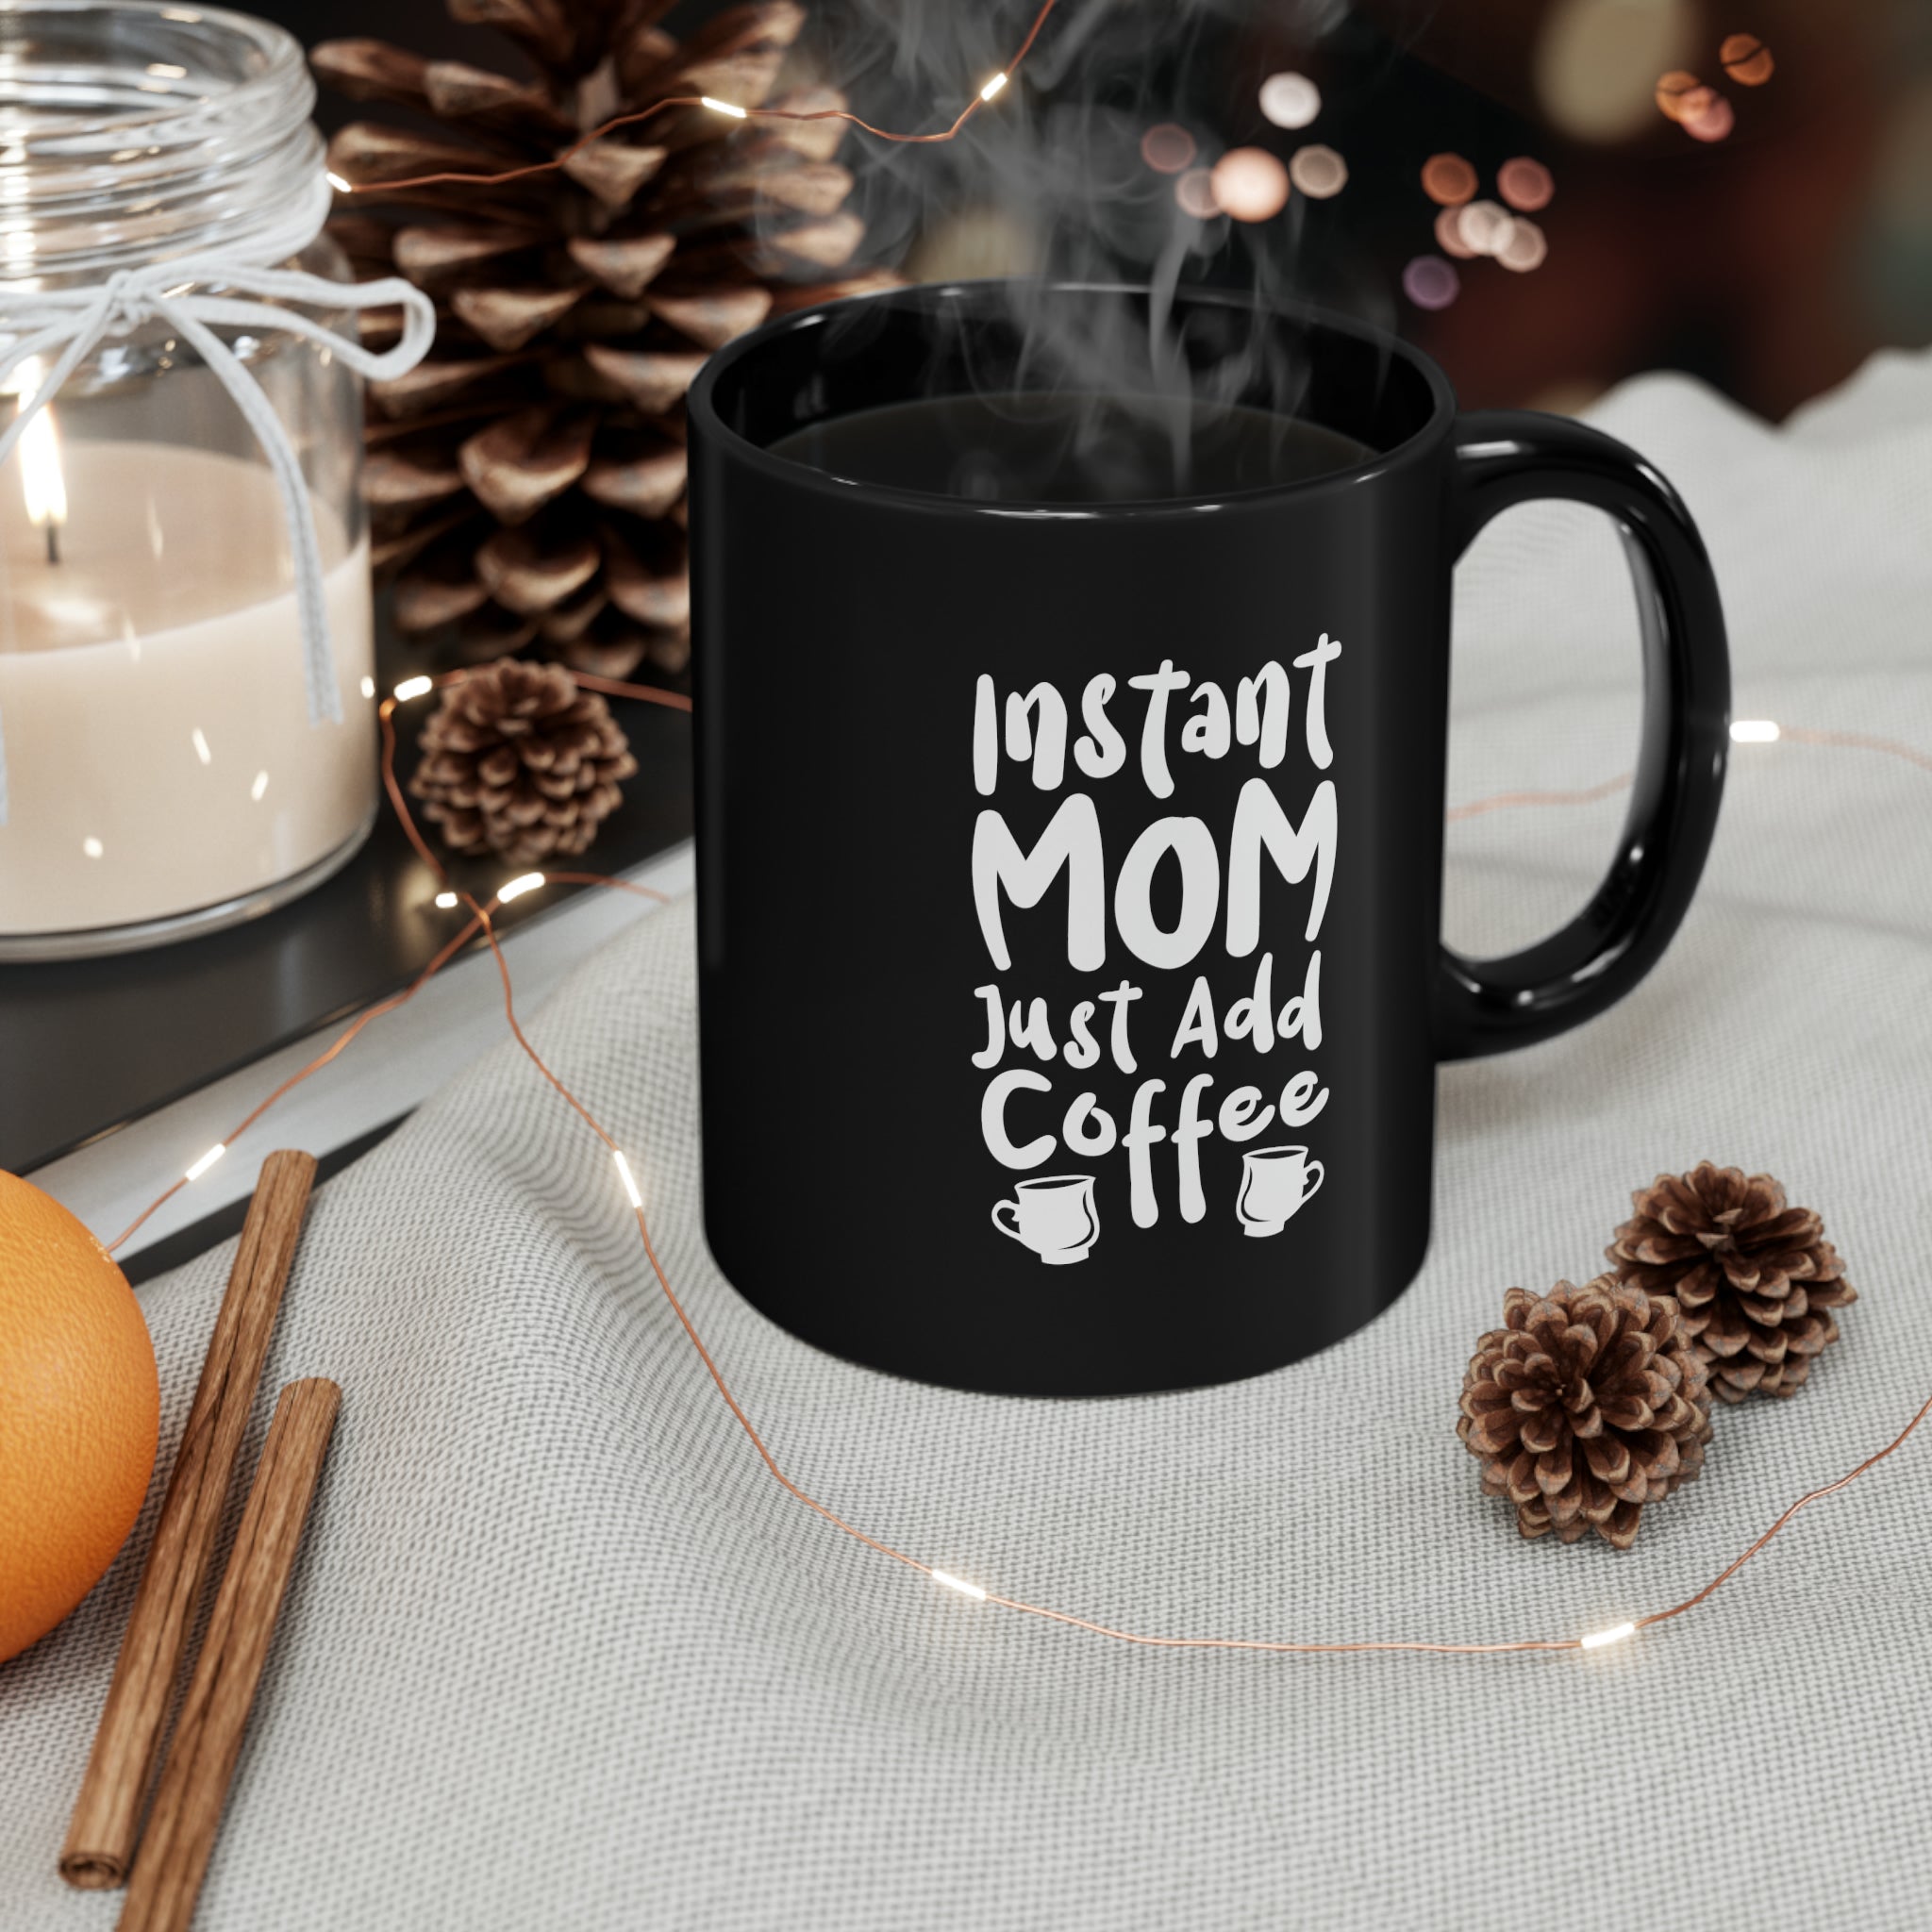 Mom Funny Black Mug (11oz, 15oz) Instant Mom Just Add Coffee Gift For Mom Mother's Day Gift Mother's Day Birthday Christmas Valentine's Gift Cup